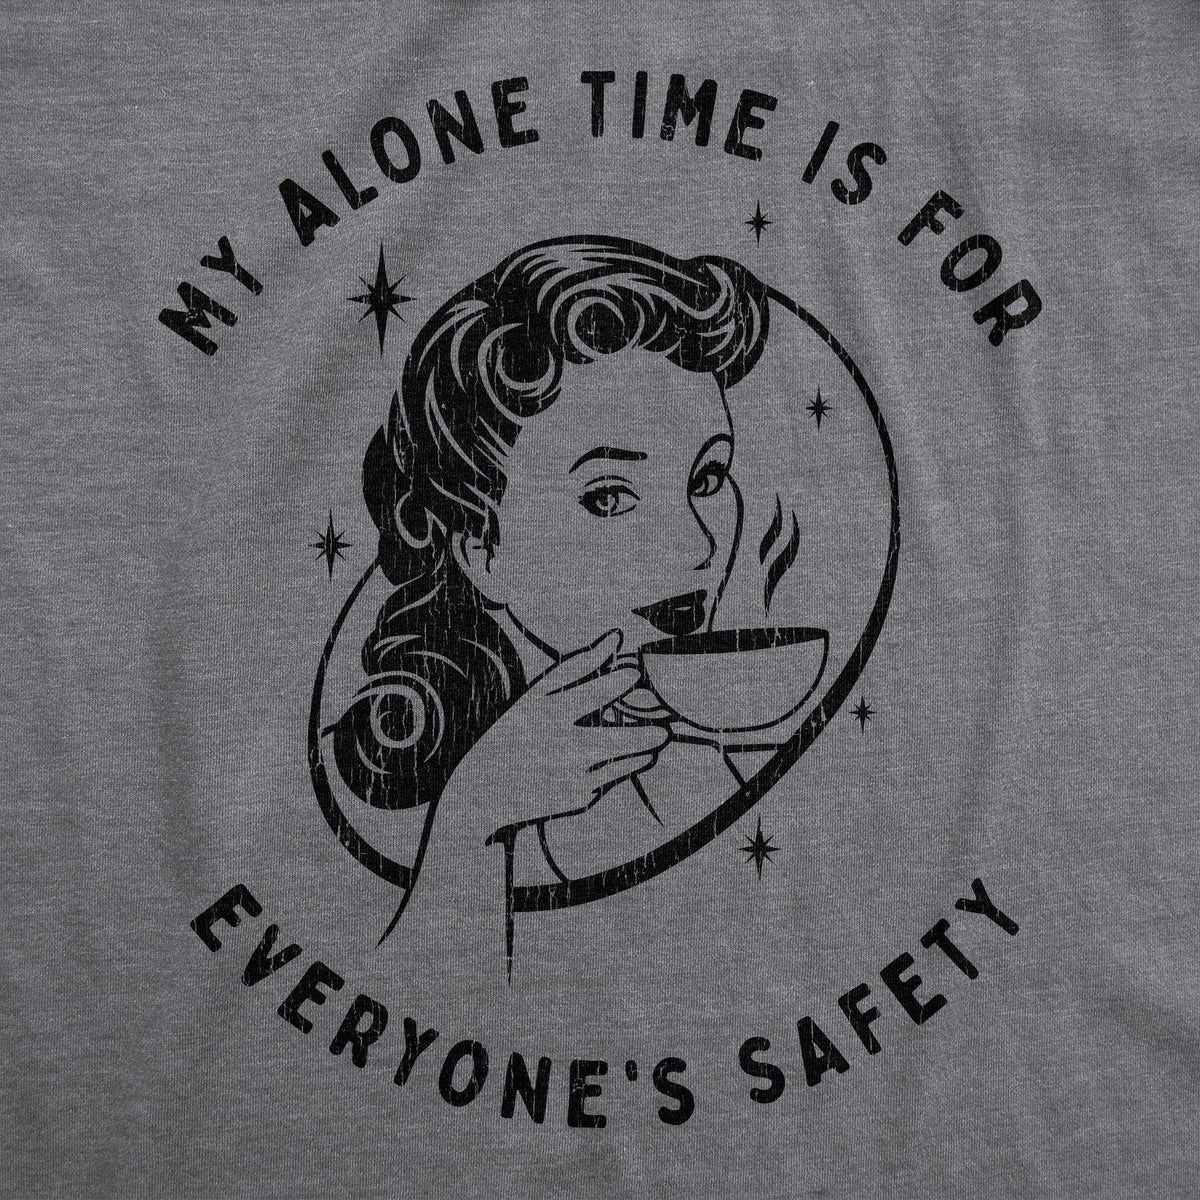 My Alone Time Is For Everyone&#39;s Safety Women&#39;s Tshirt  -  Crazy Dog T-Shirts